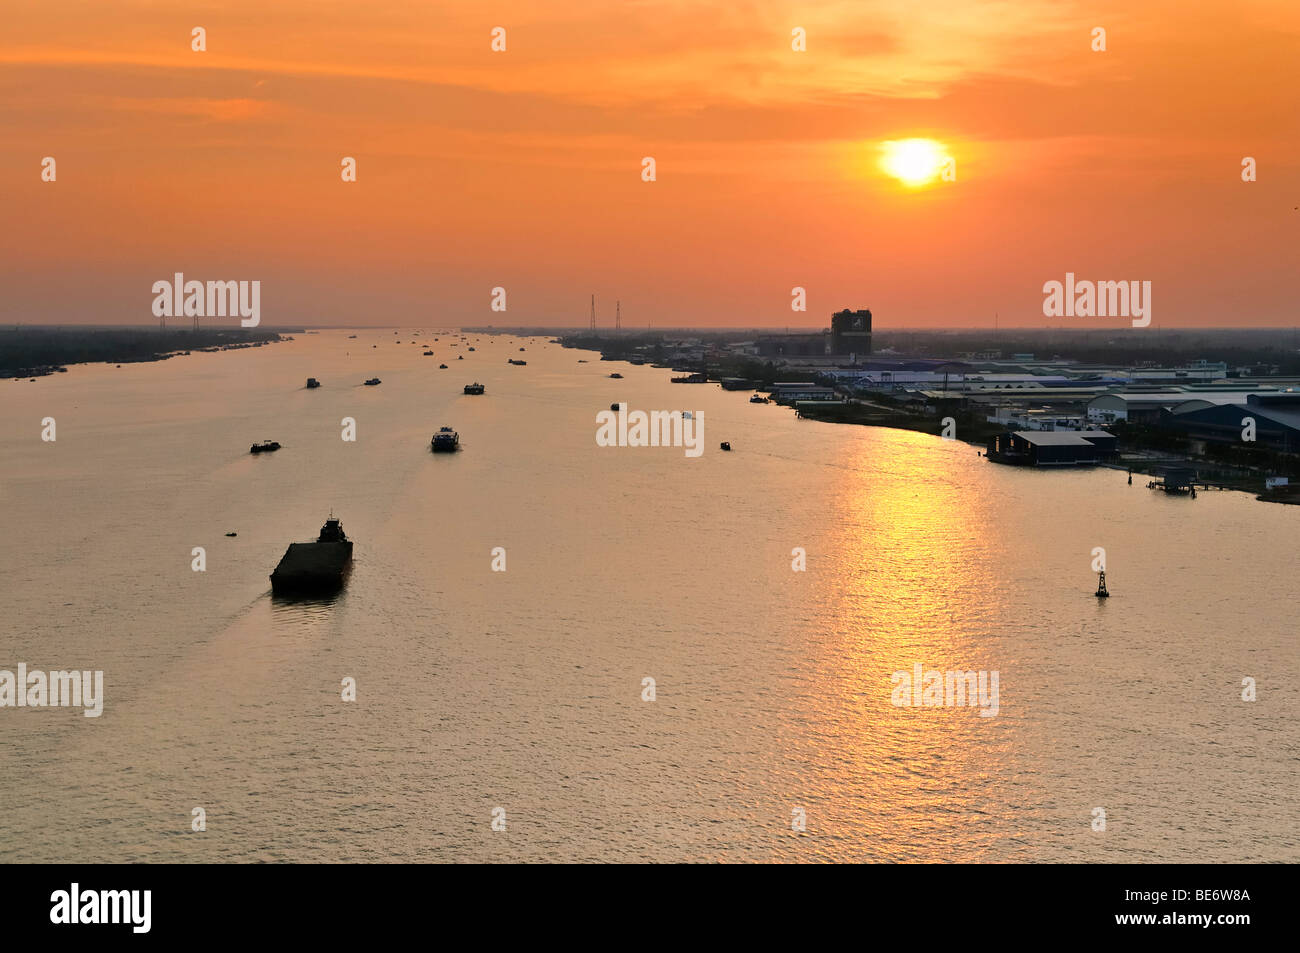 Transport boats in the last evening light during sunset on the Mekong River, My Tho, Mekong Delta, Vietnam, Asia Stock Photo